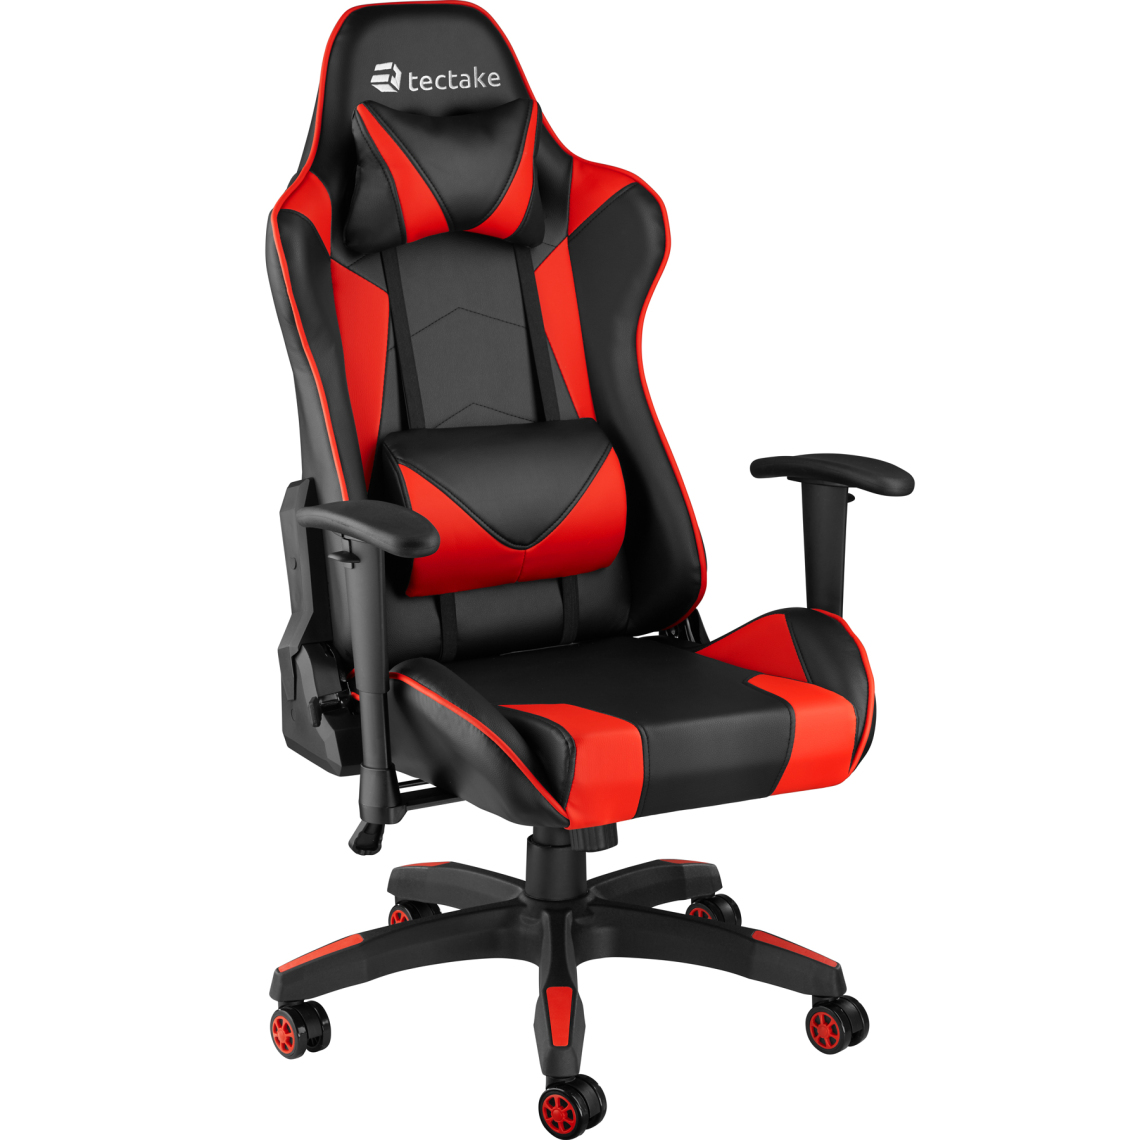 Tectake - Chaise gamer TWINK - noir/rouge - Chaises